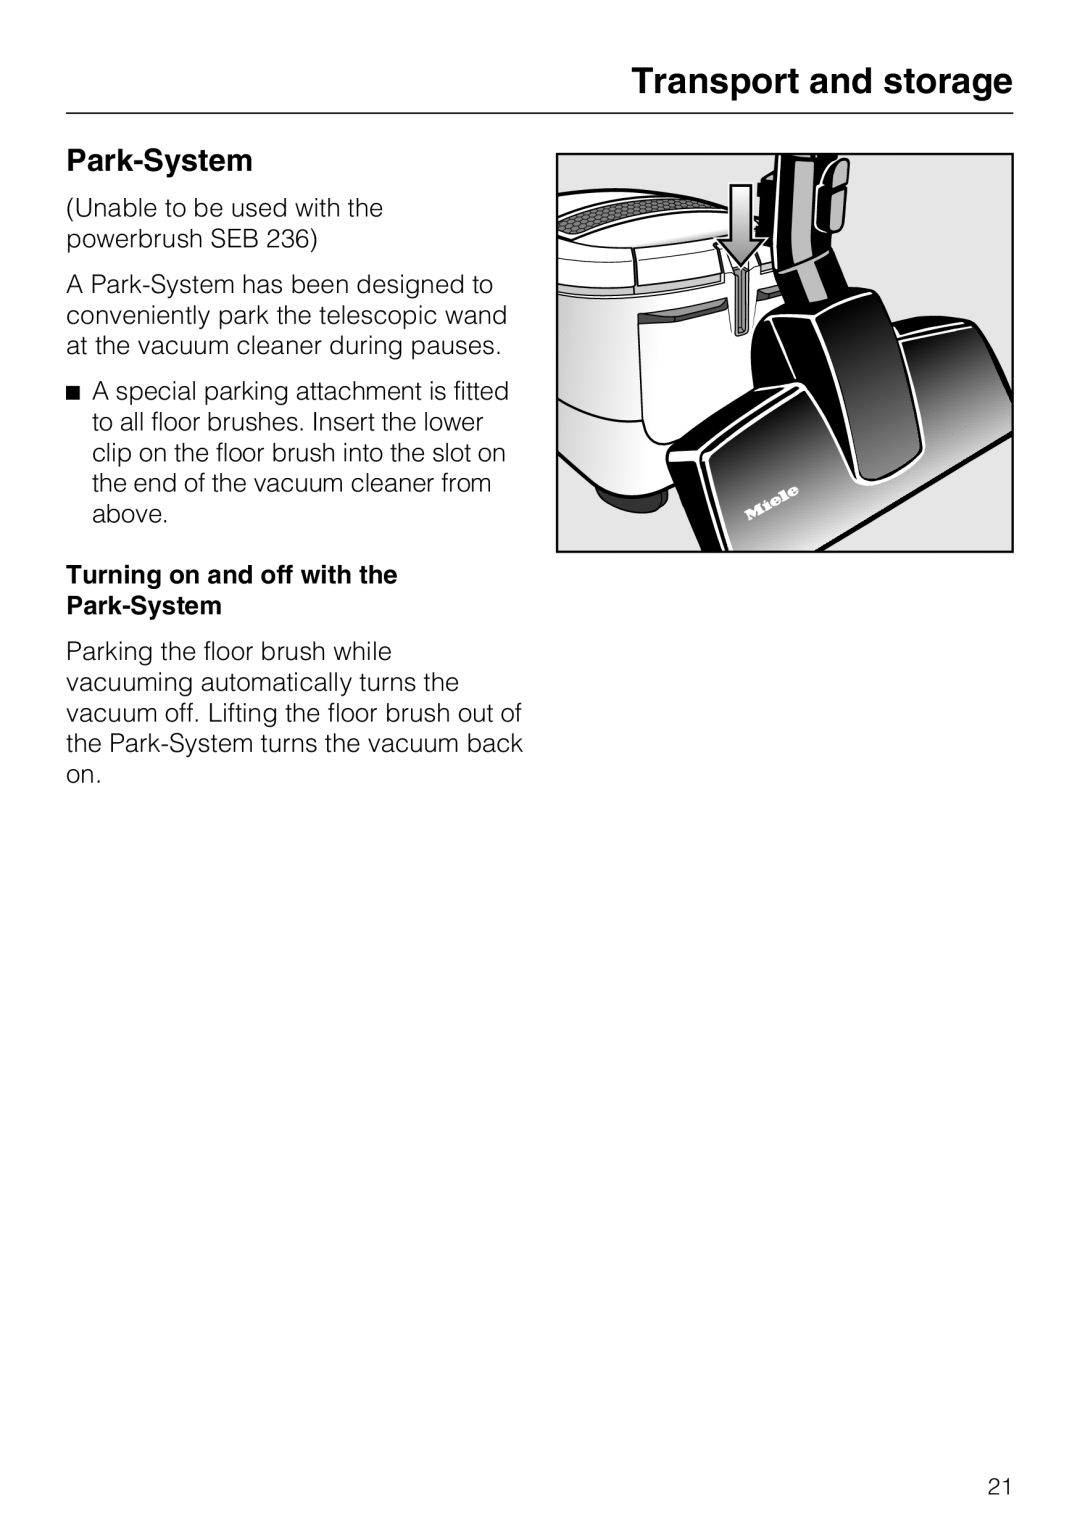 Miele S5981 operating instructions Transport and storage, Turning on and off with the Park-System 